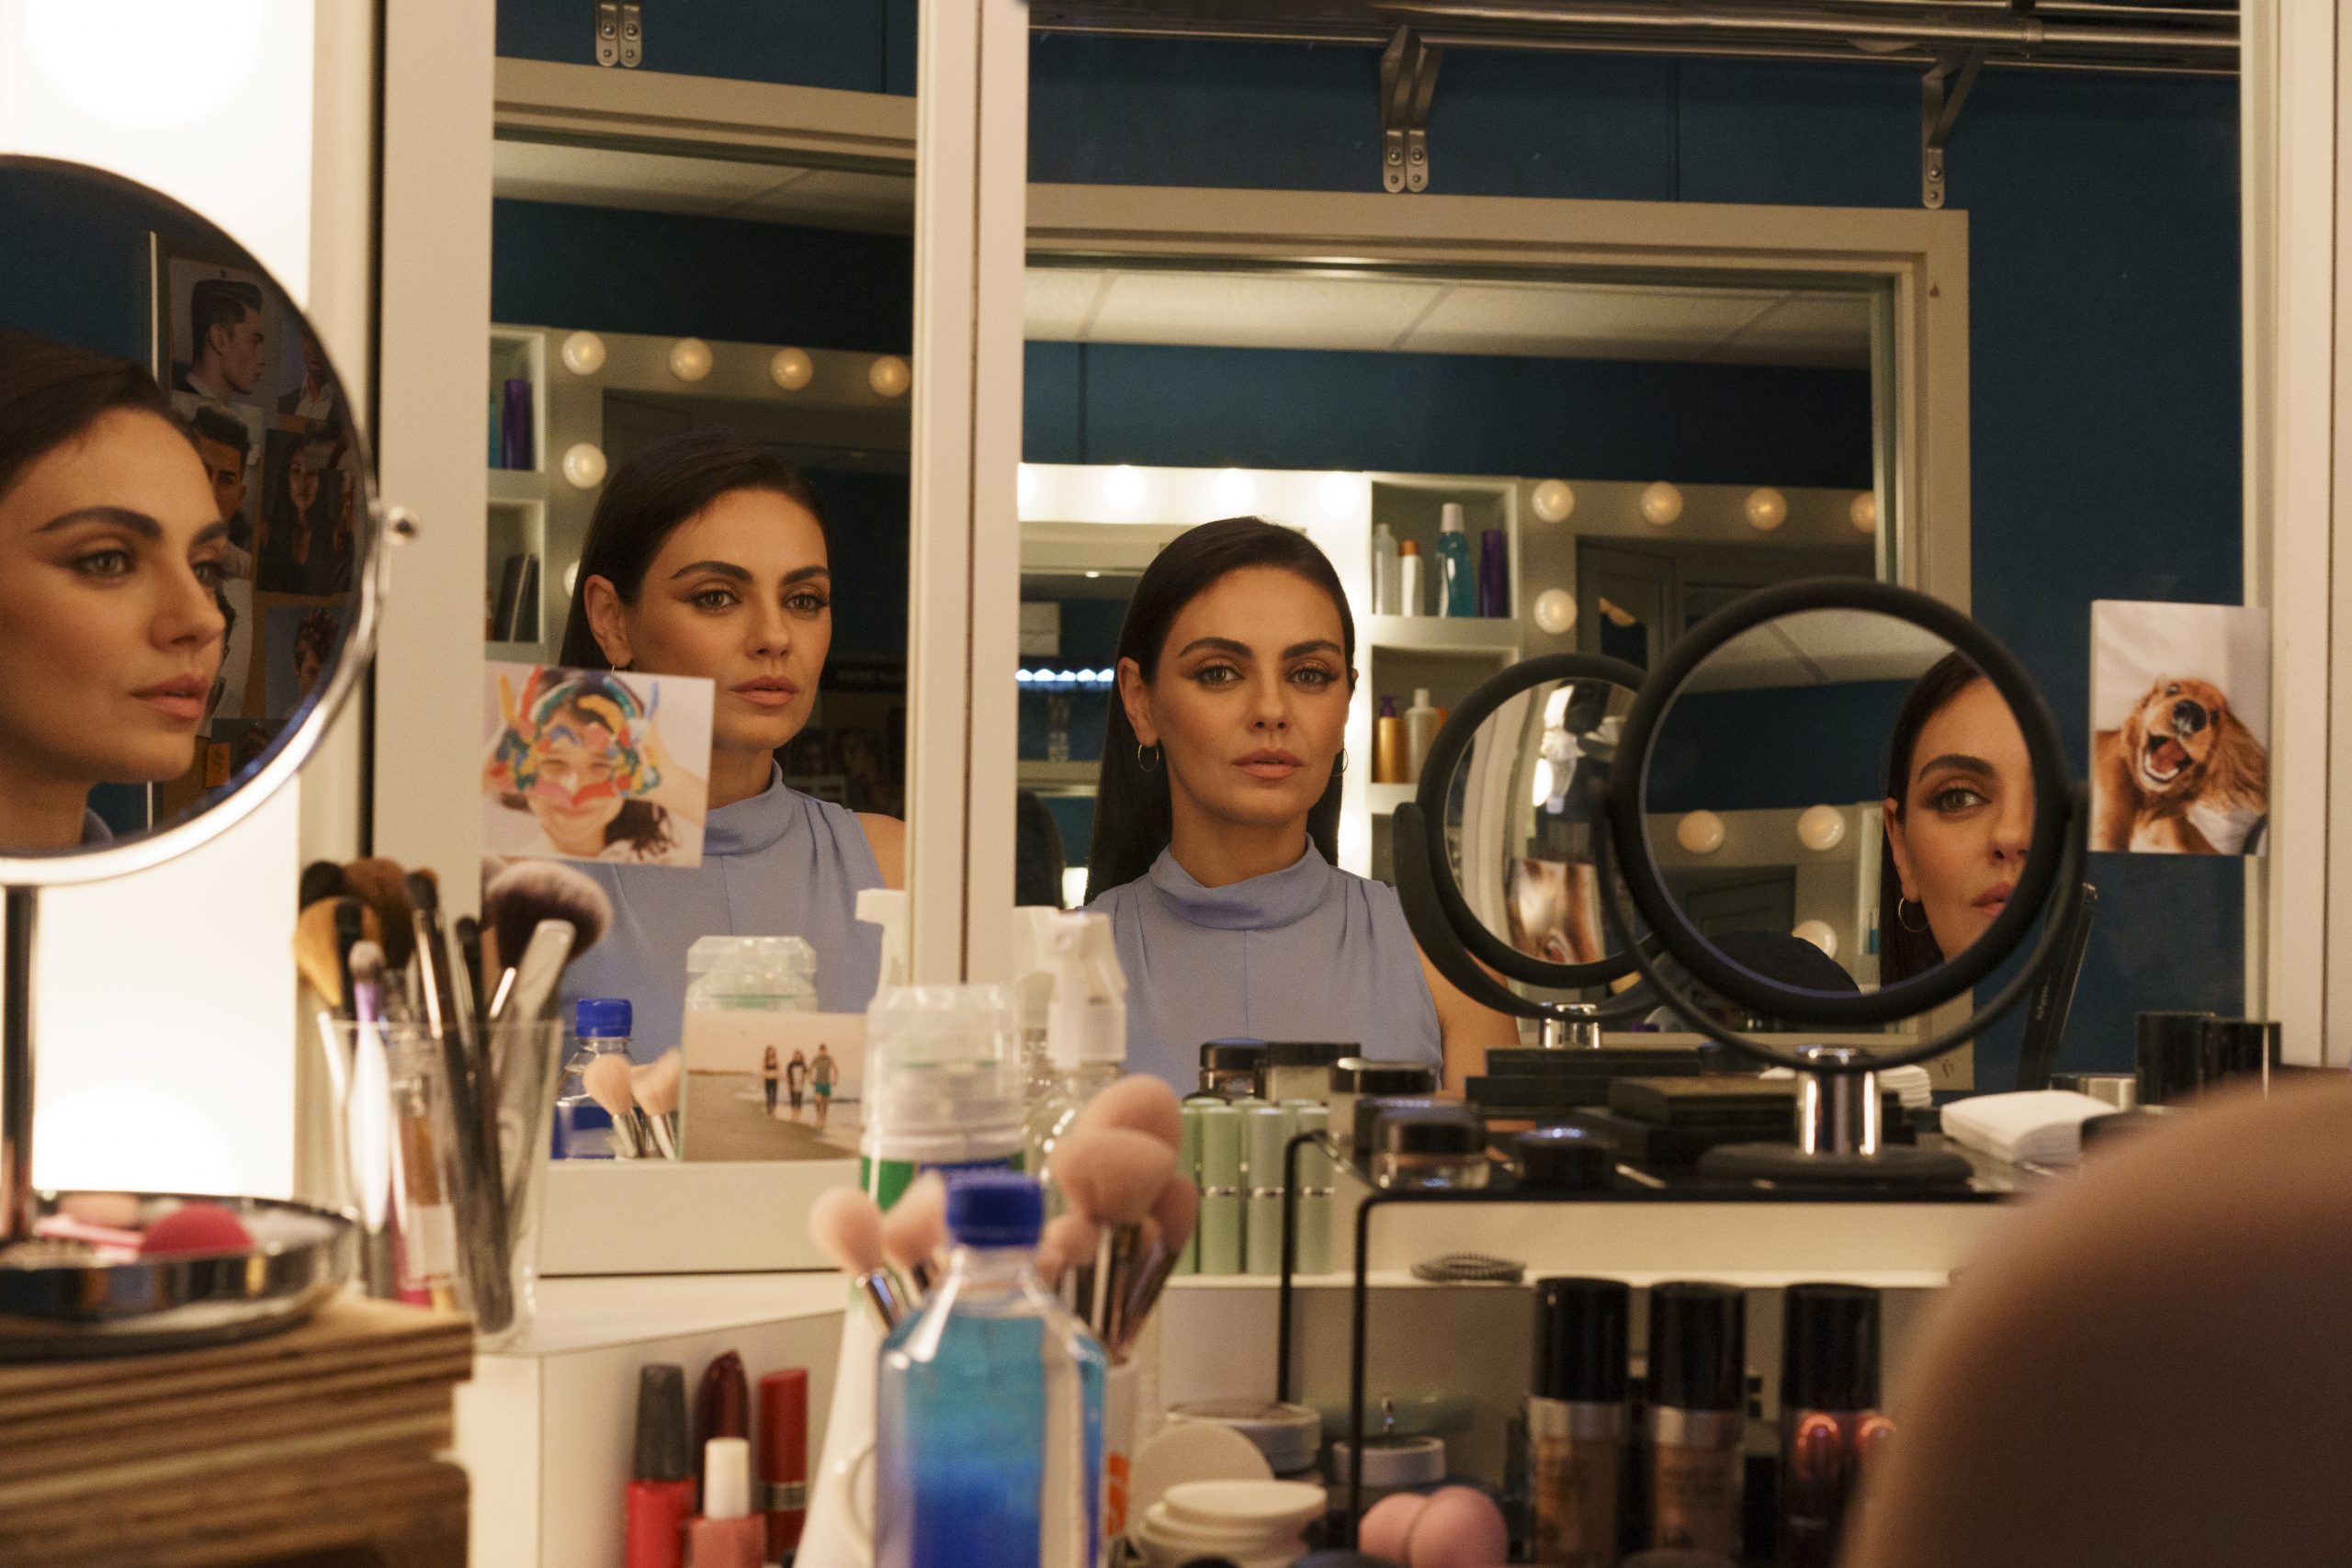 Mila Kunis in Luckiest Girl Alive stares at herself through several mirrors on her vanity.